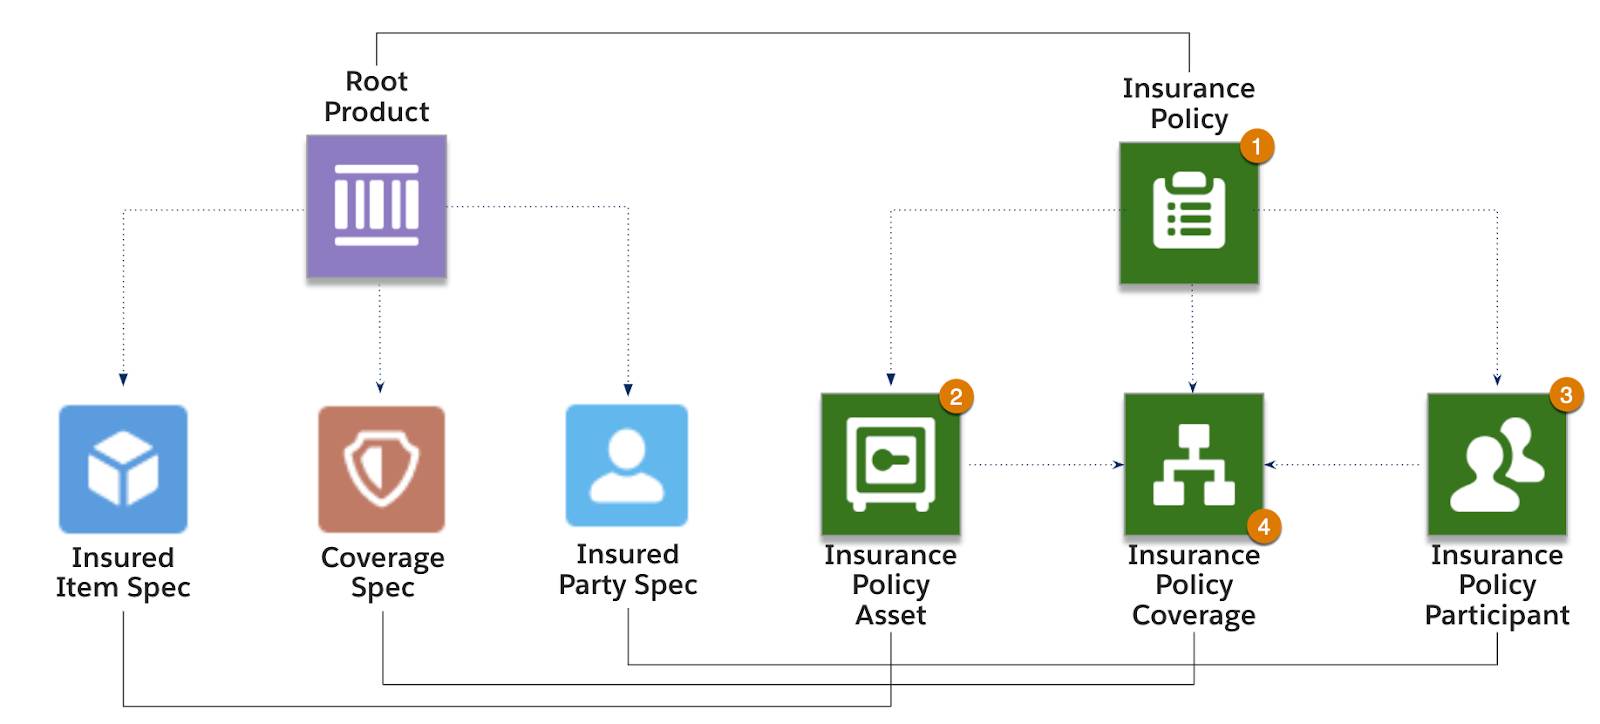 A numbered diagram that illustrates how product model objects relate to insurance policy objects as described in the corresponding text.